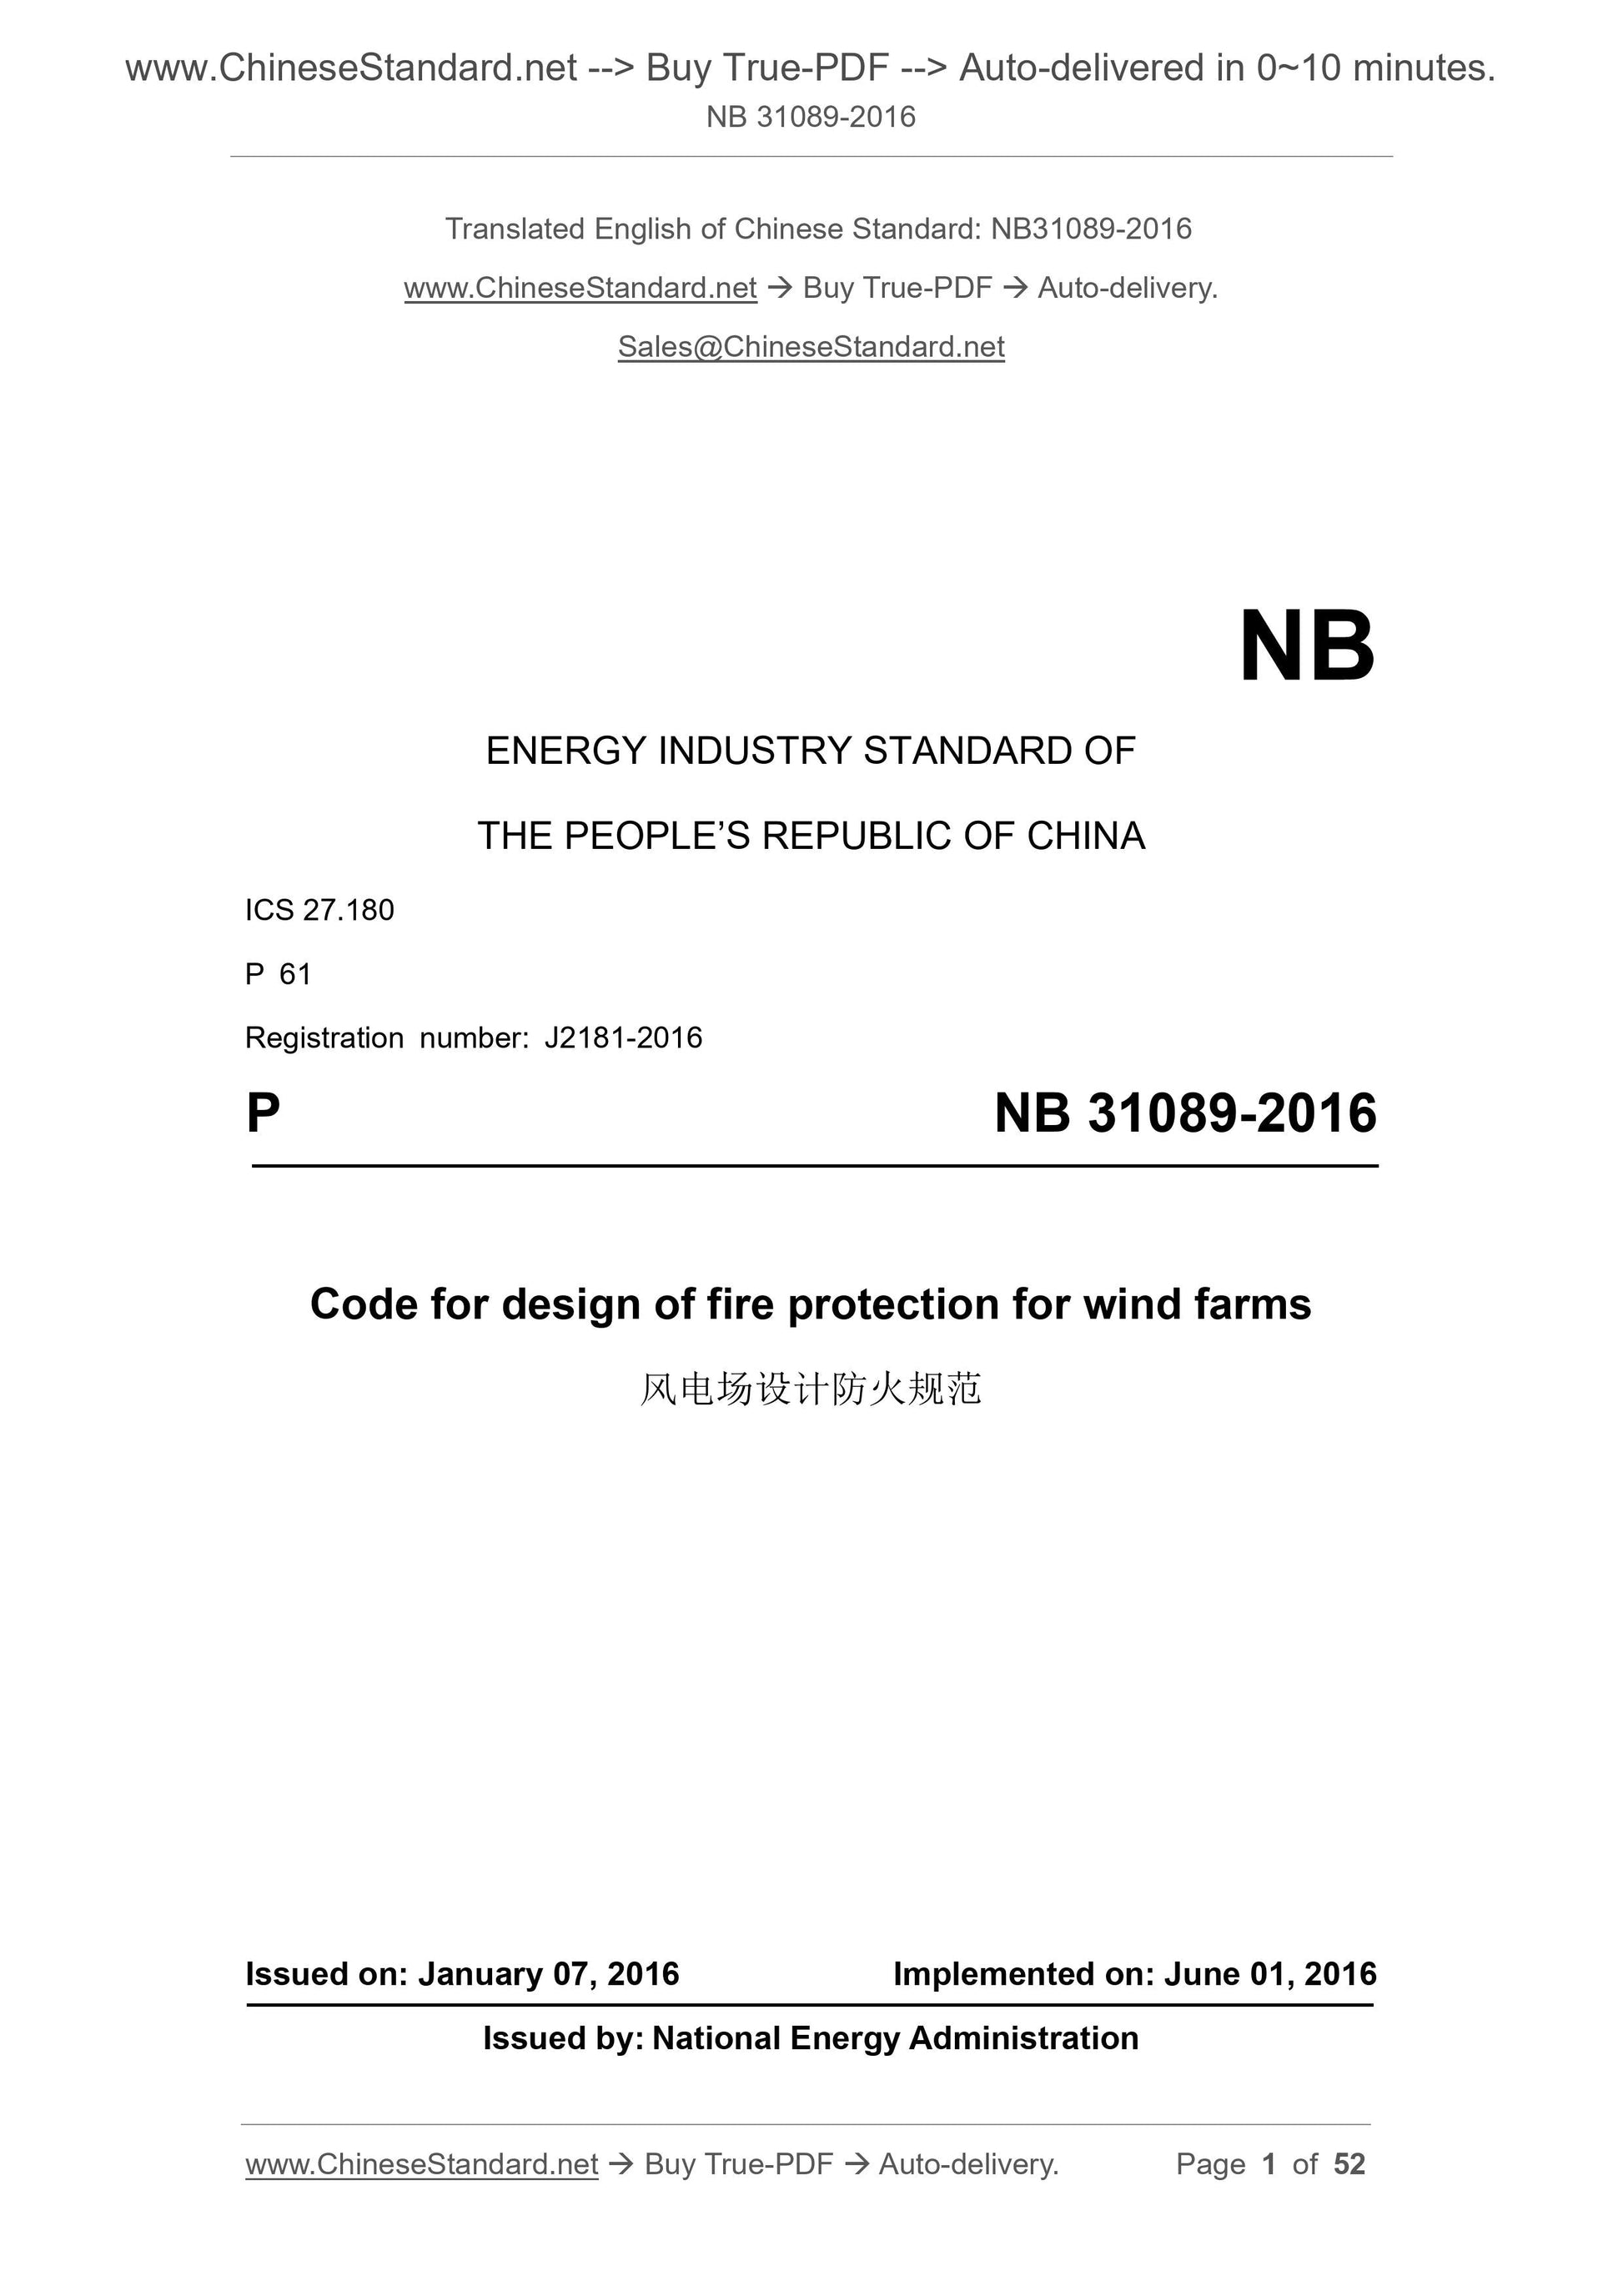 NB 31089-2016 Page 1